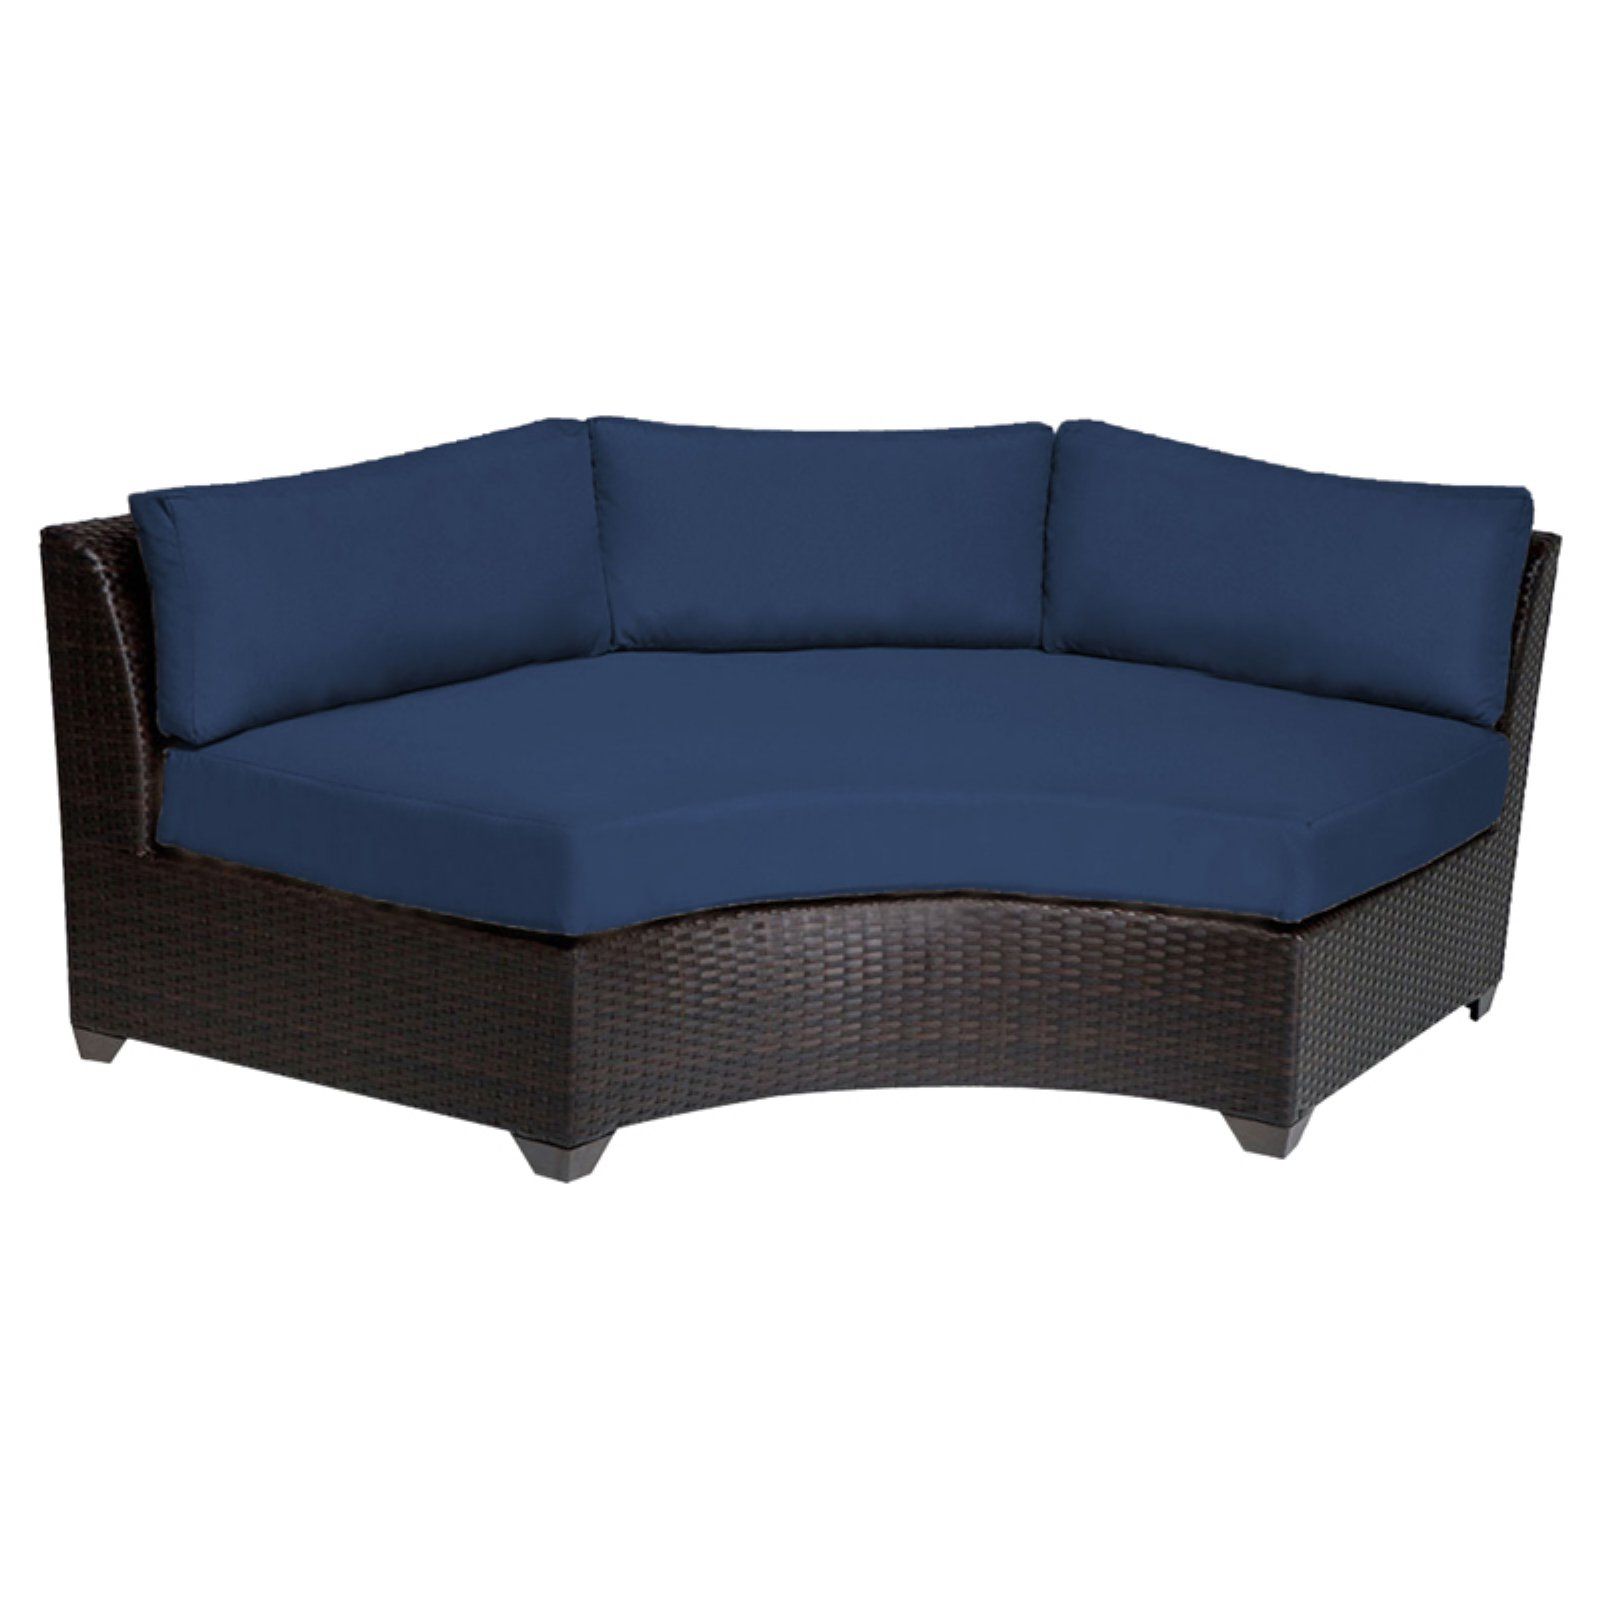 Newest Waterbury Curved Armless Sofa With Cushions Inside Tk Classics Barbados Curved Outdoor Middle Chair With 2 Sets (View 13 of 20)